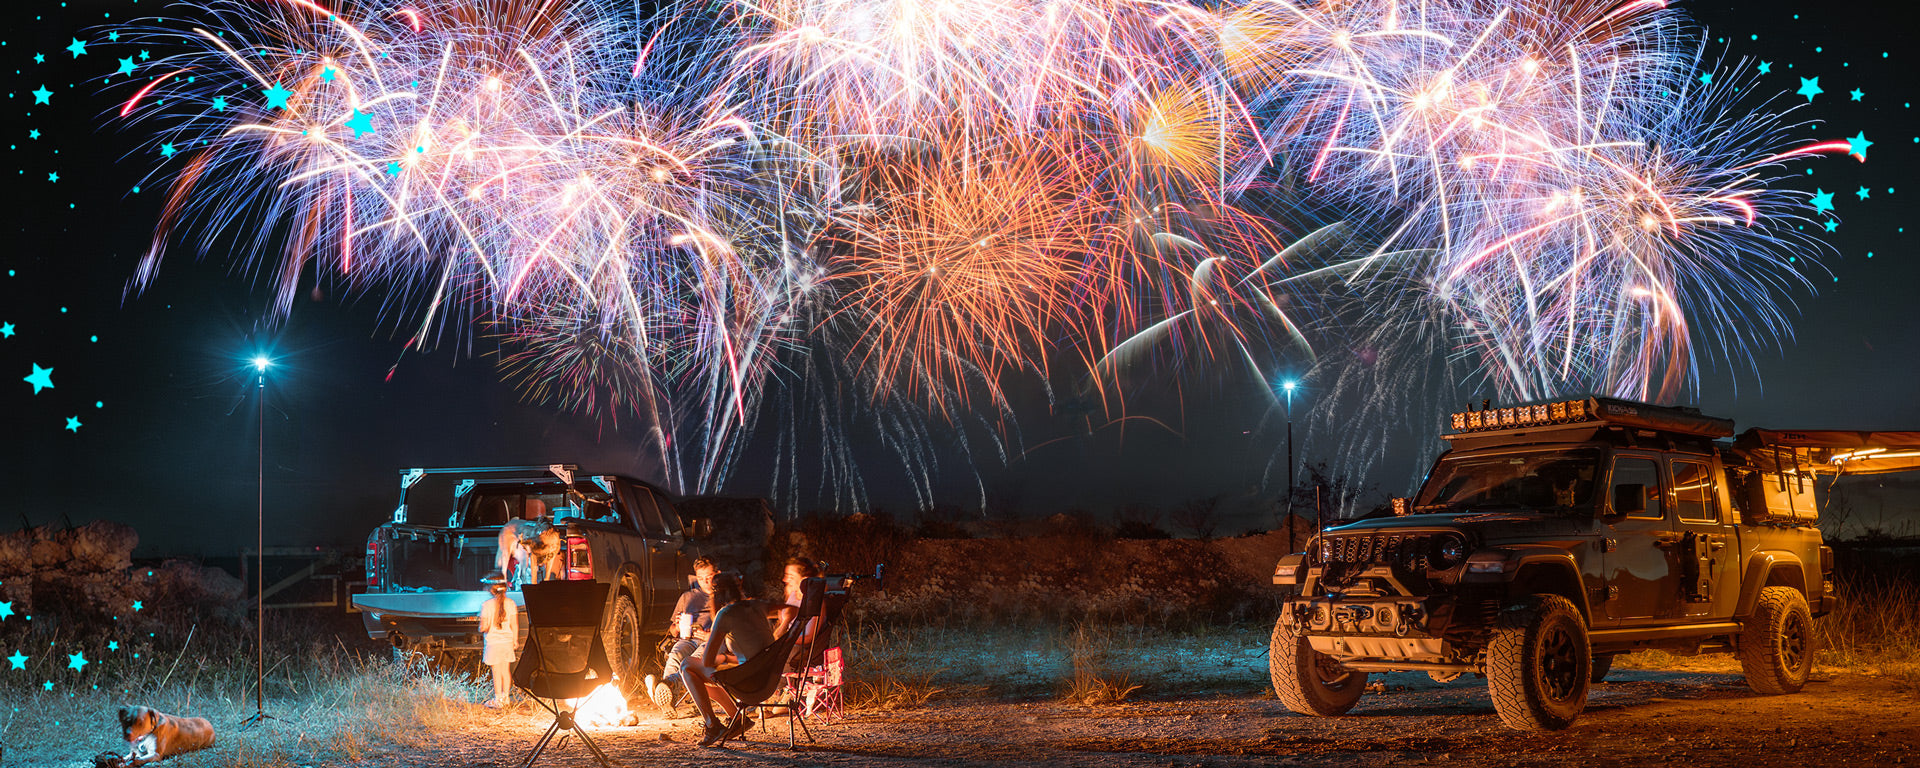 4th of July website banner featuring an overlanding night time theme lit up by overlanders and a sky full of fireworks